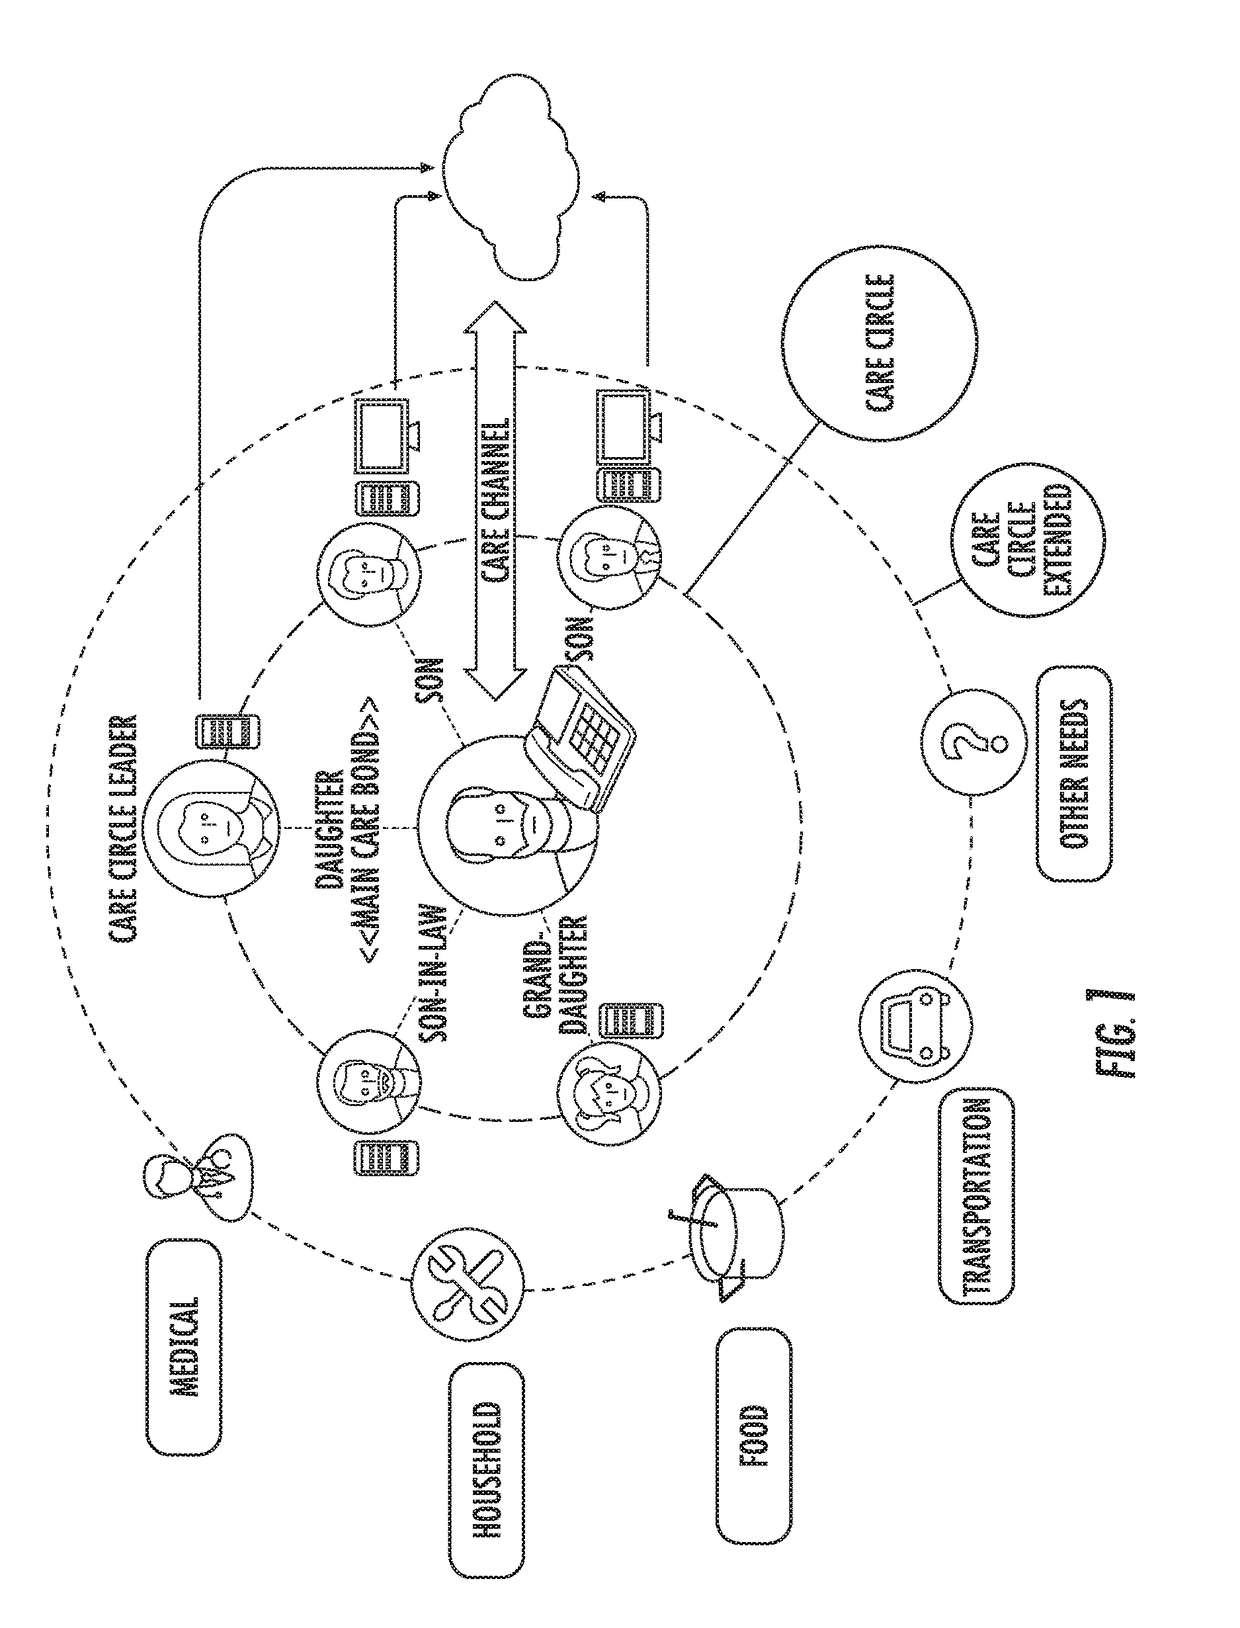 Systems and Methods for Automated and Remote Care Giving